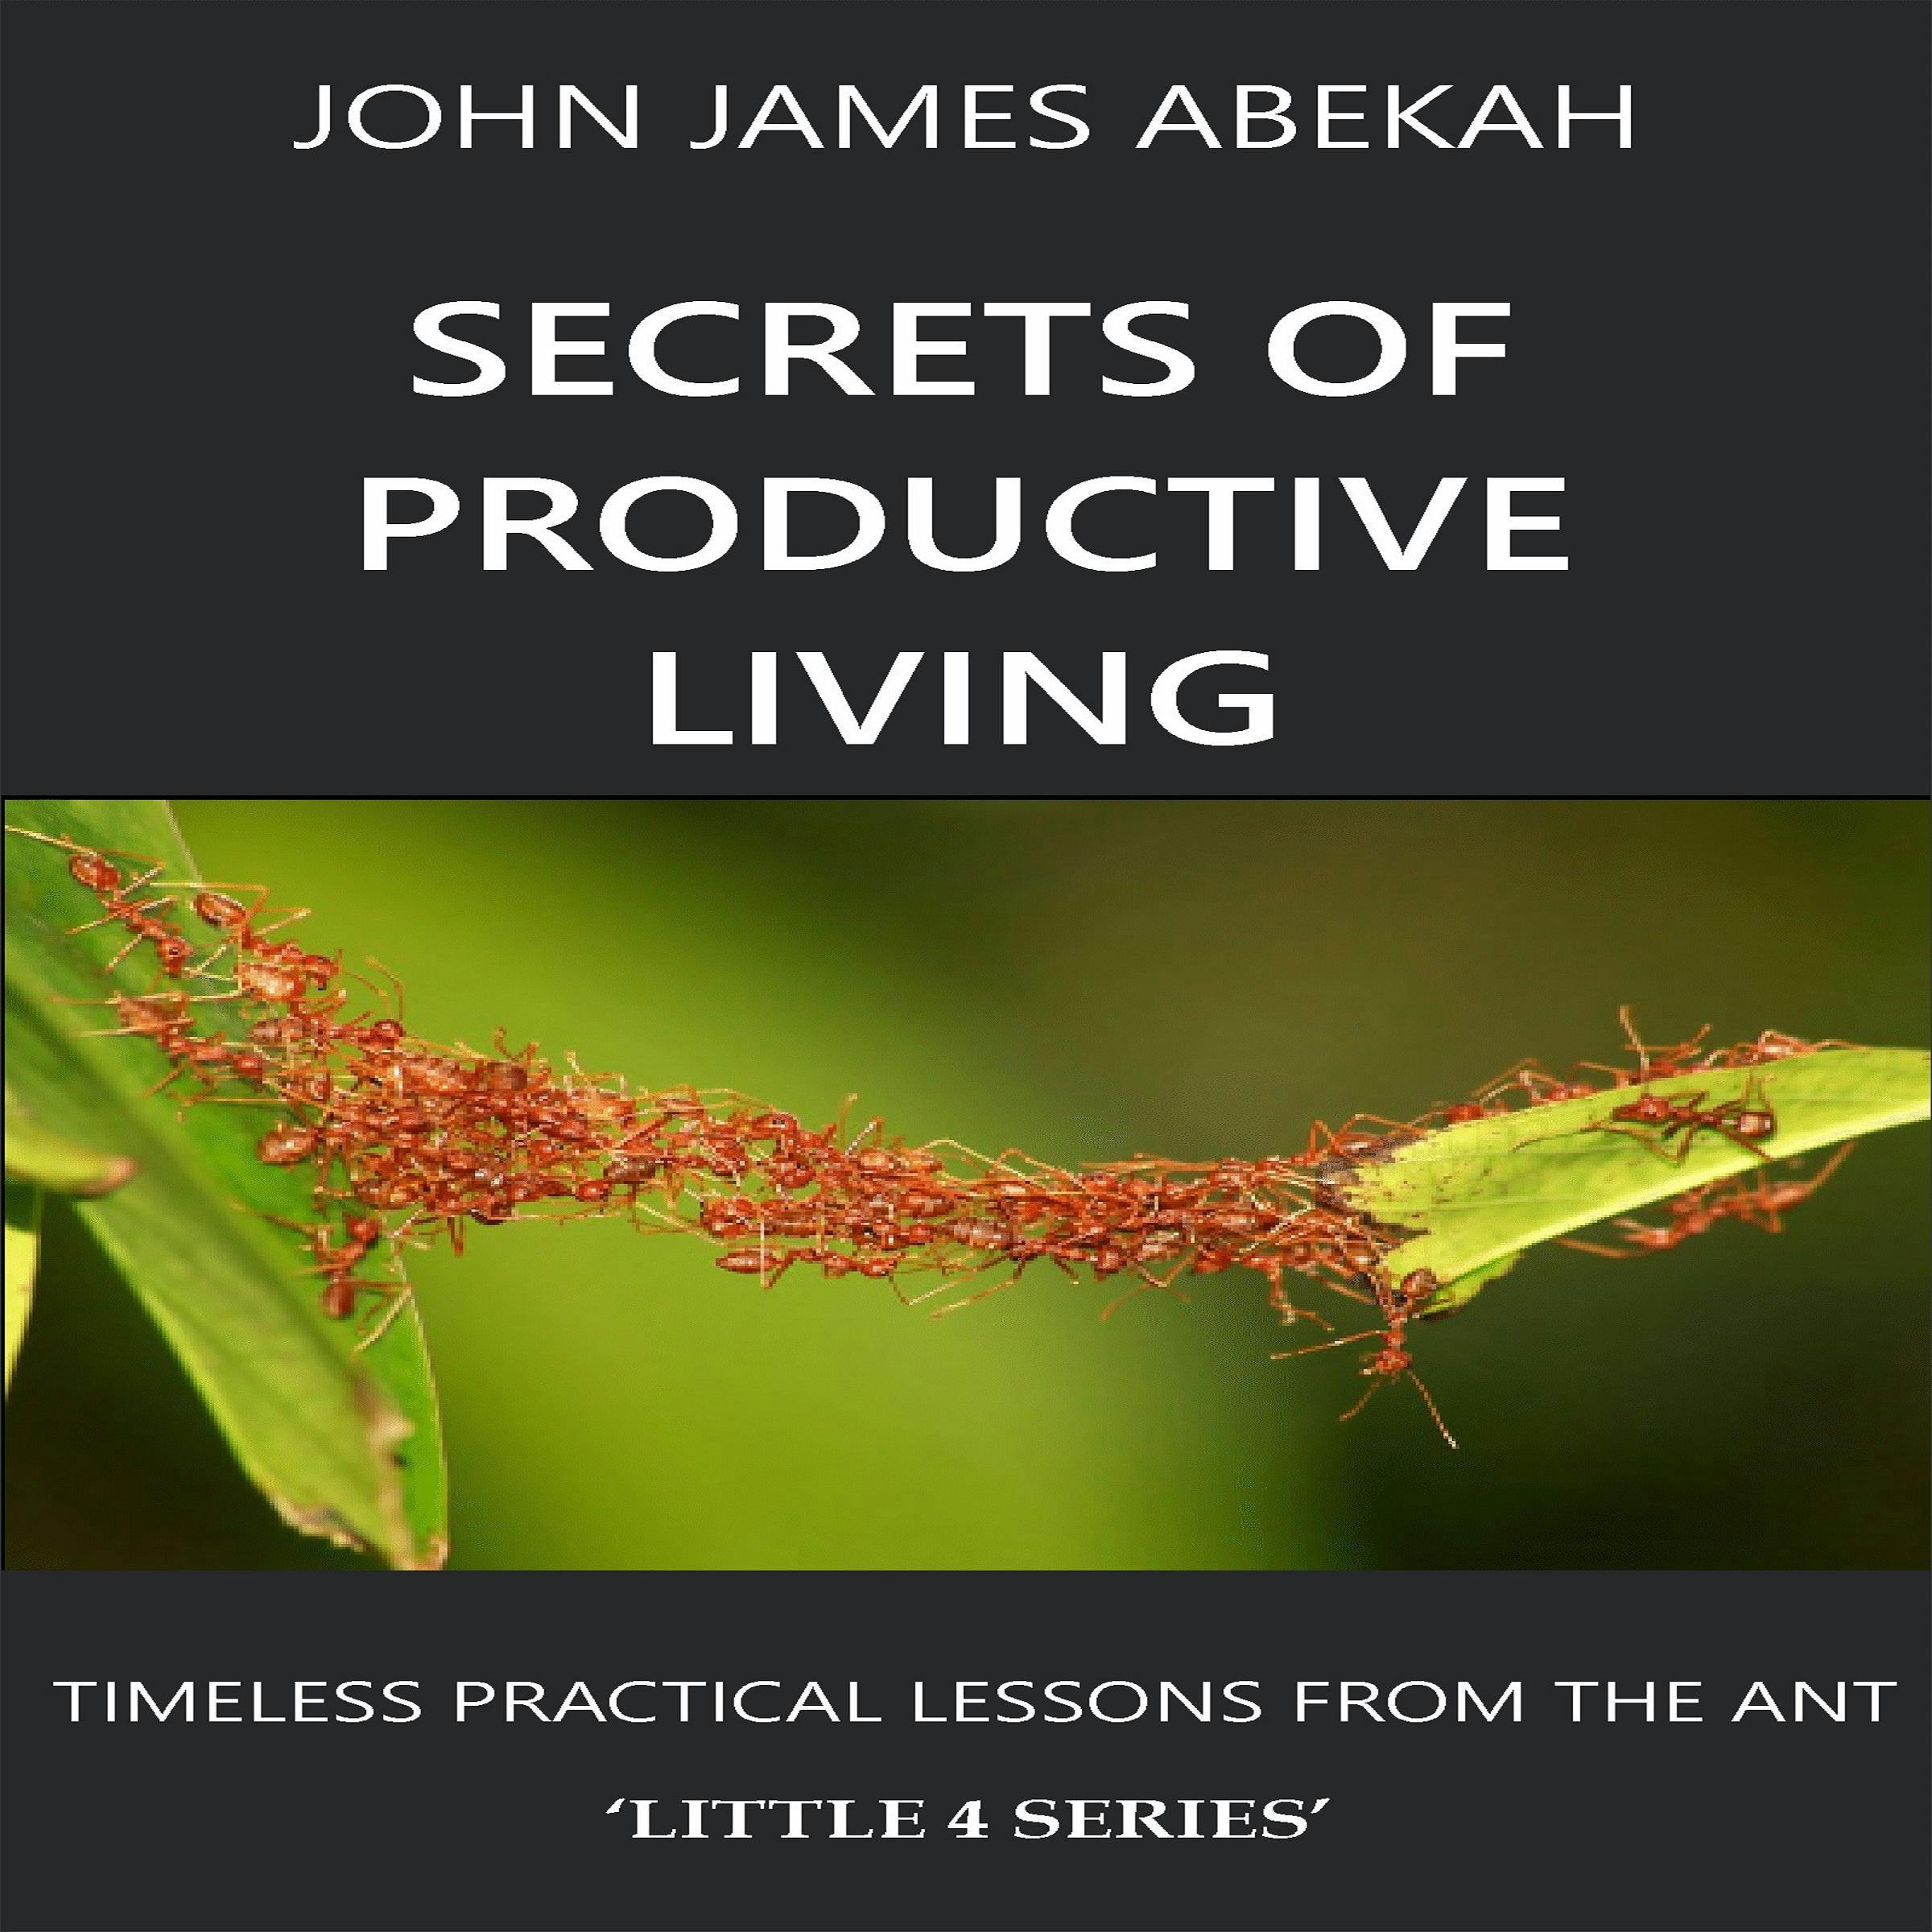 SECRETS OF PRODUCTIVE LIVING: TIMELESS PRACTICAL LESSONS FROM THE ANT - undefined